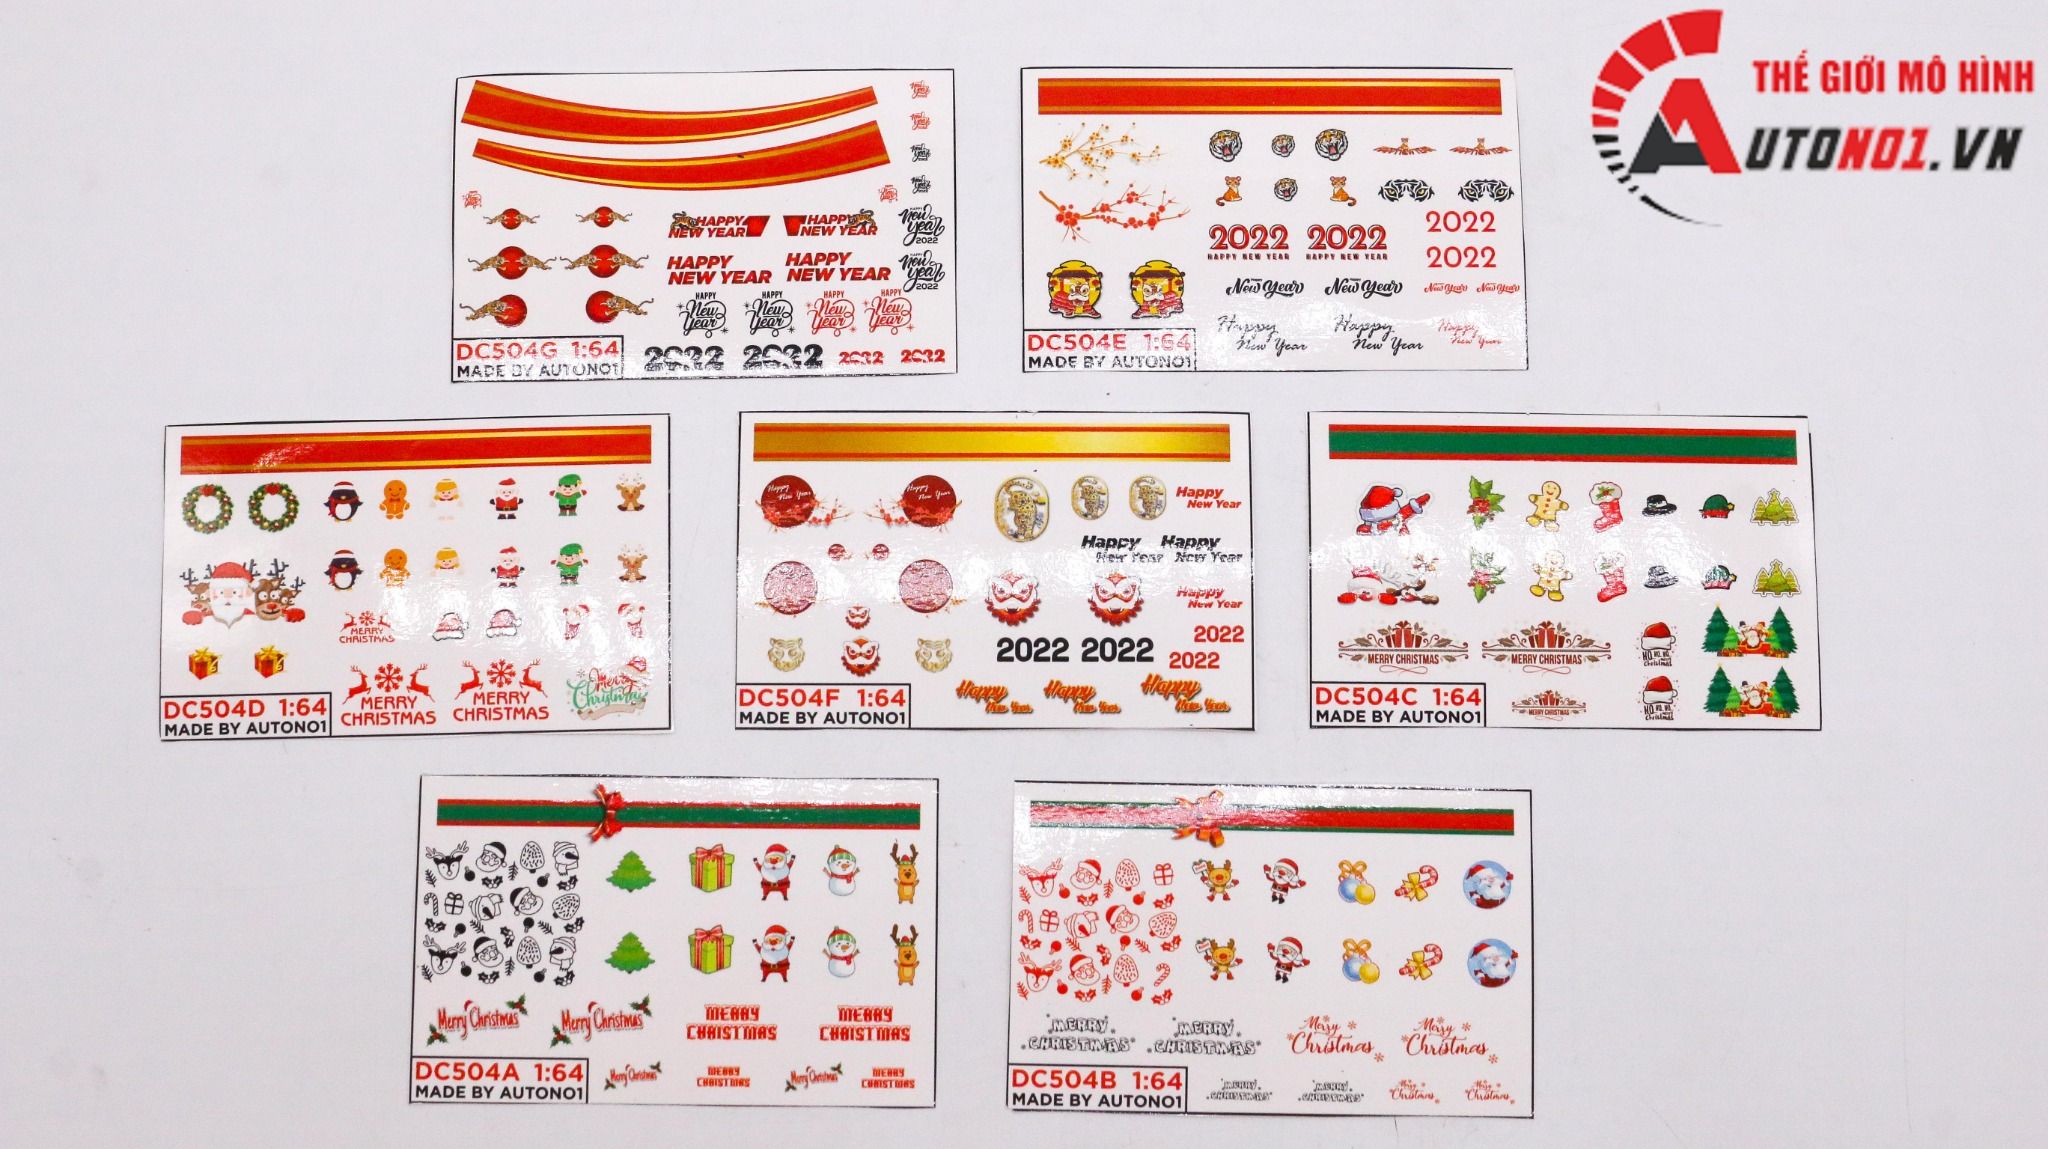  Decal nước Happy New Year 2022 Red 1:64 Autono1 DC504g 